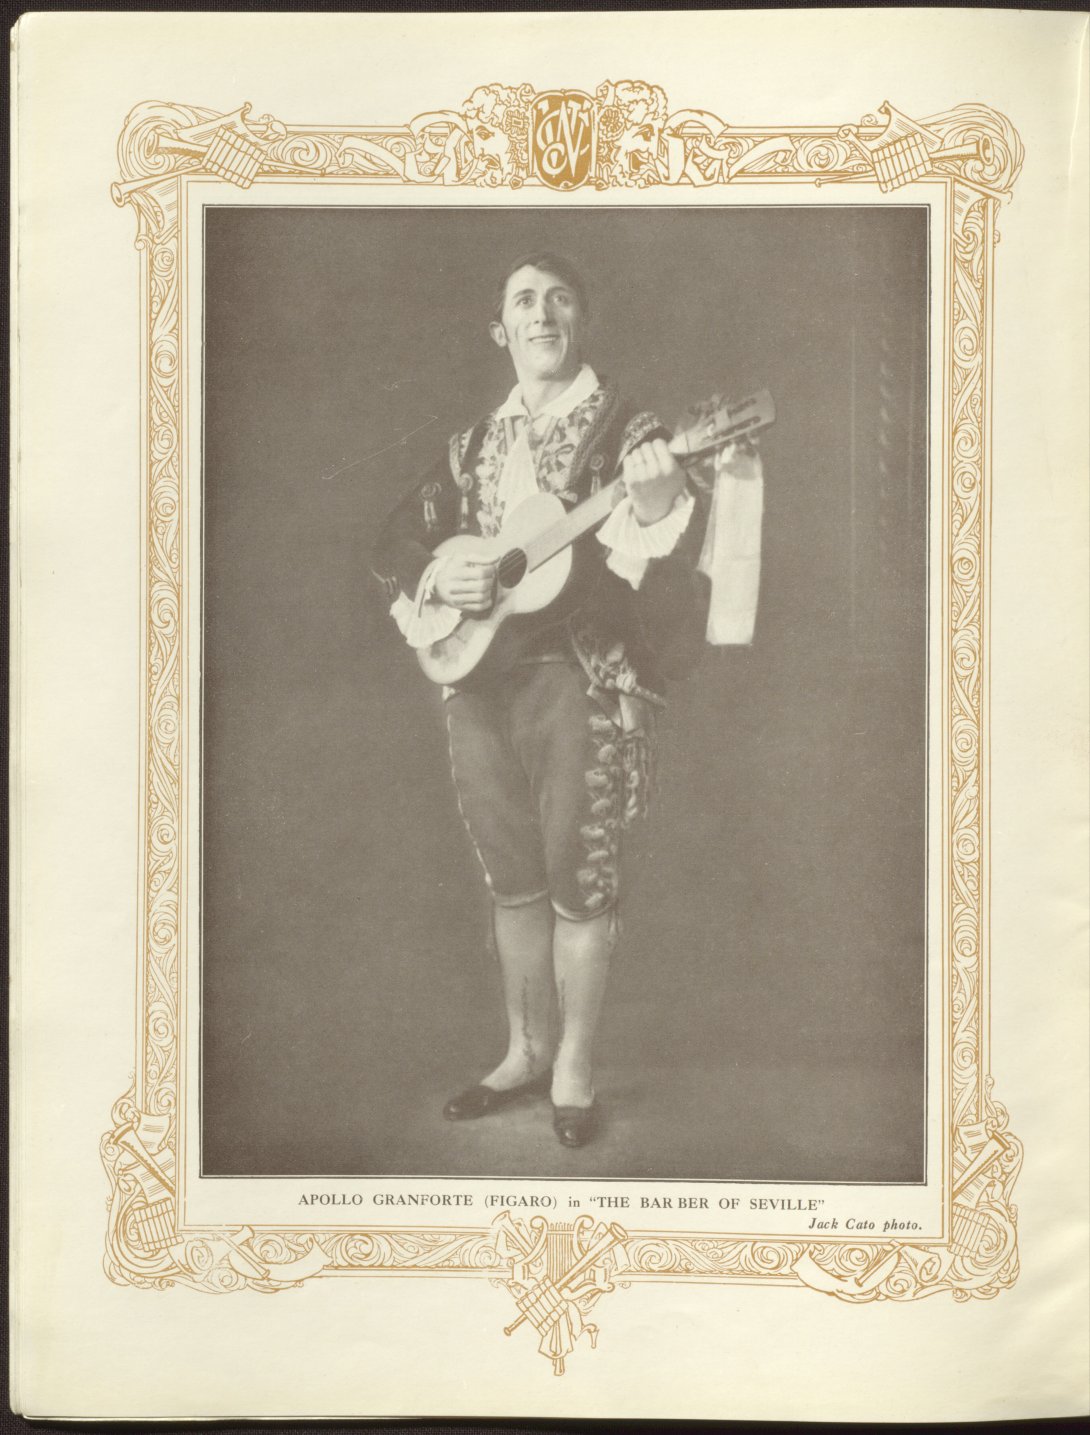 Photograph of a male performer, carrying a guitar, in Spanish costume